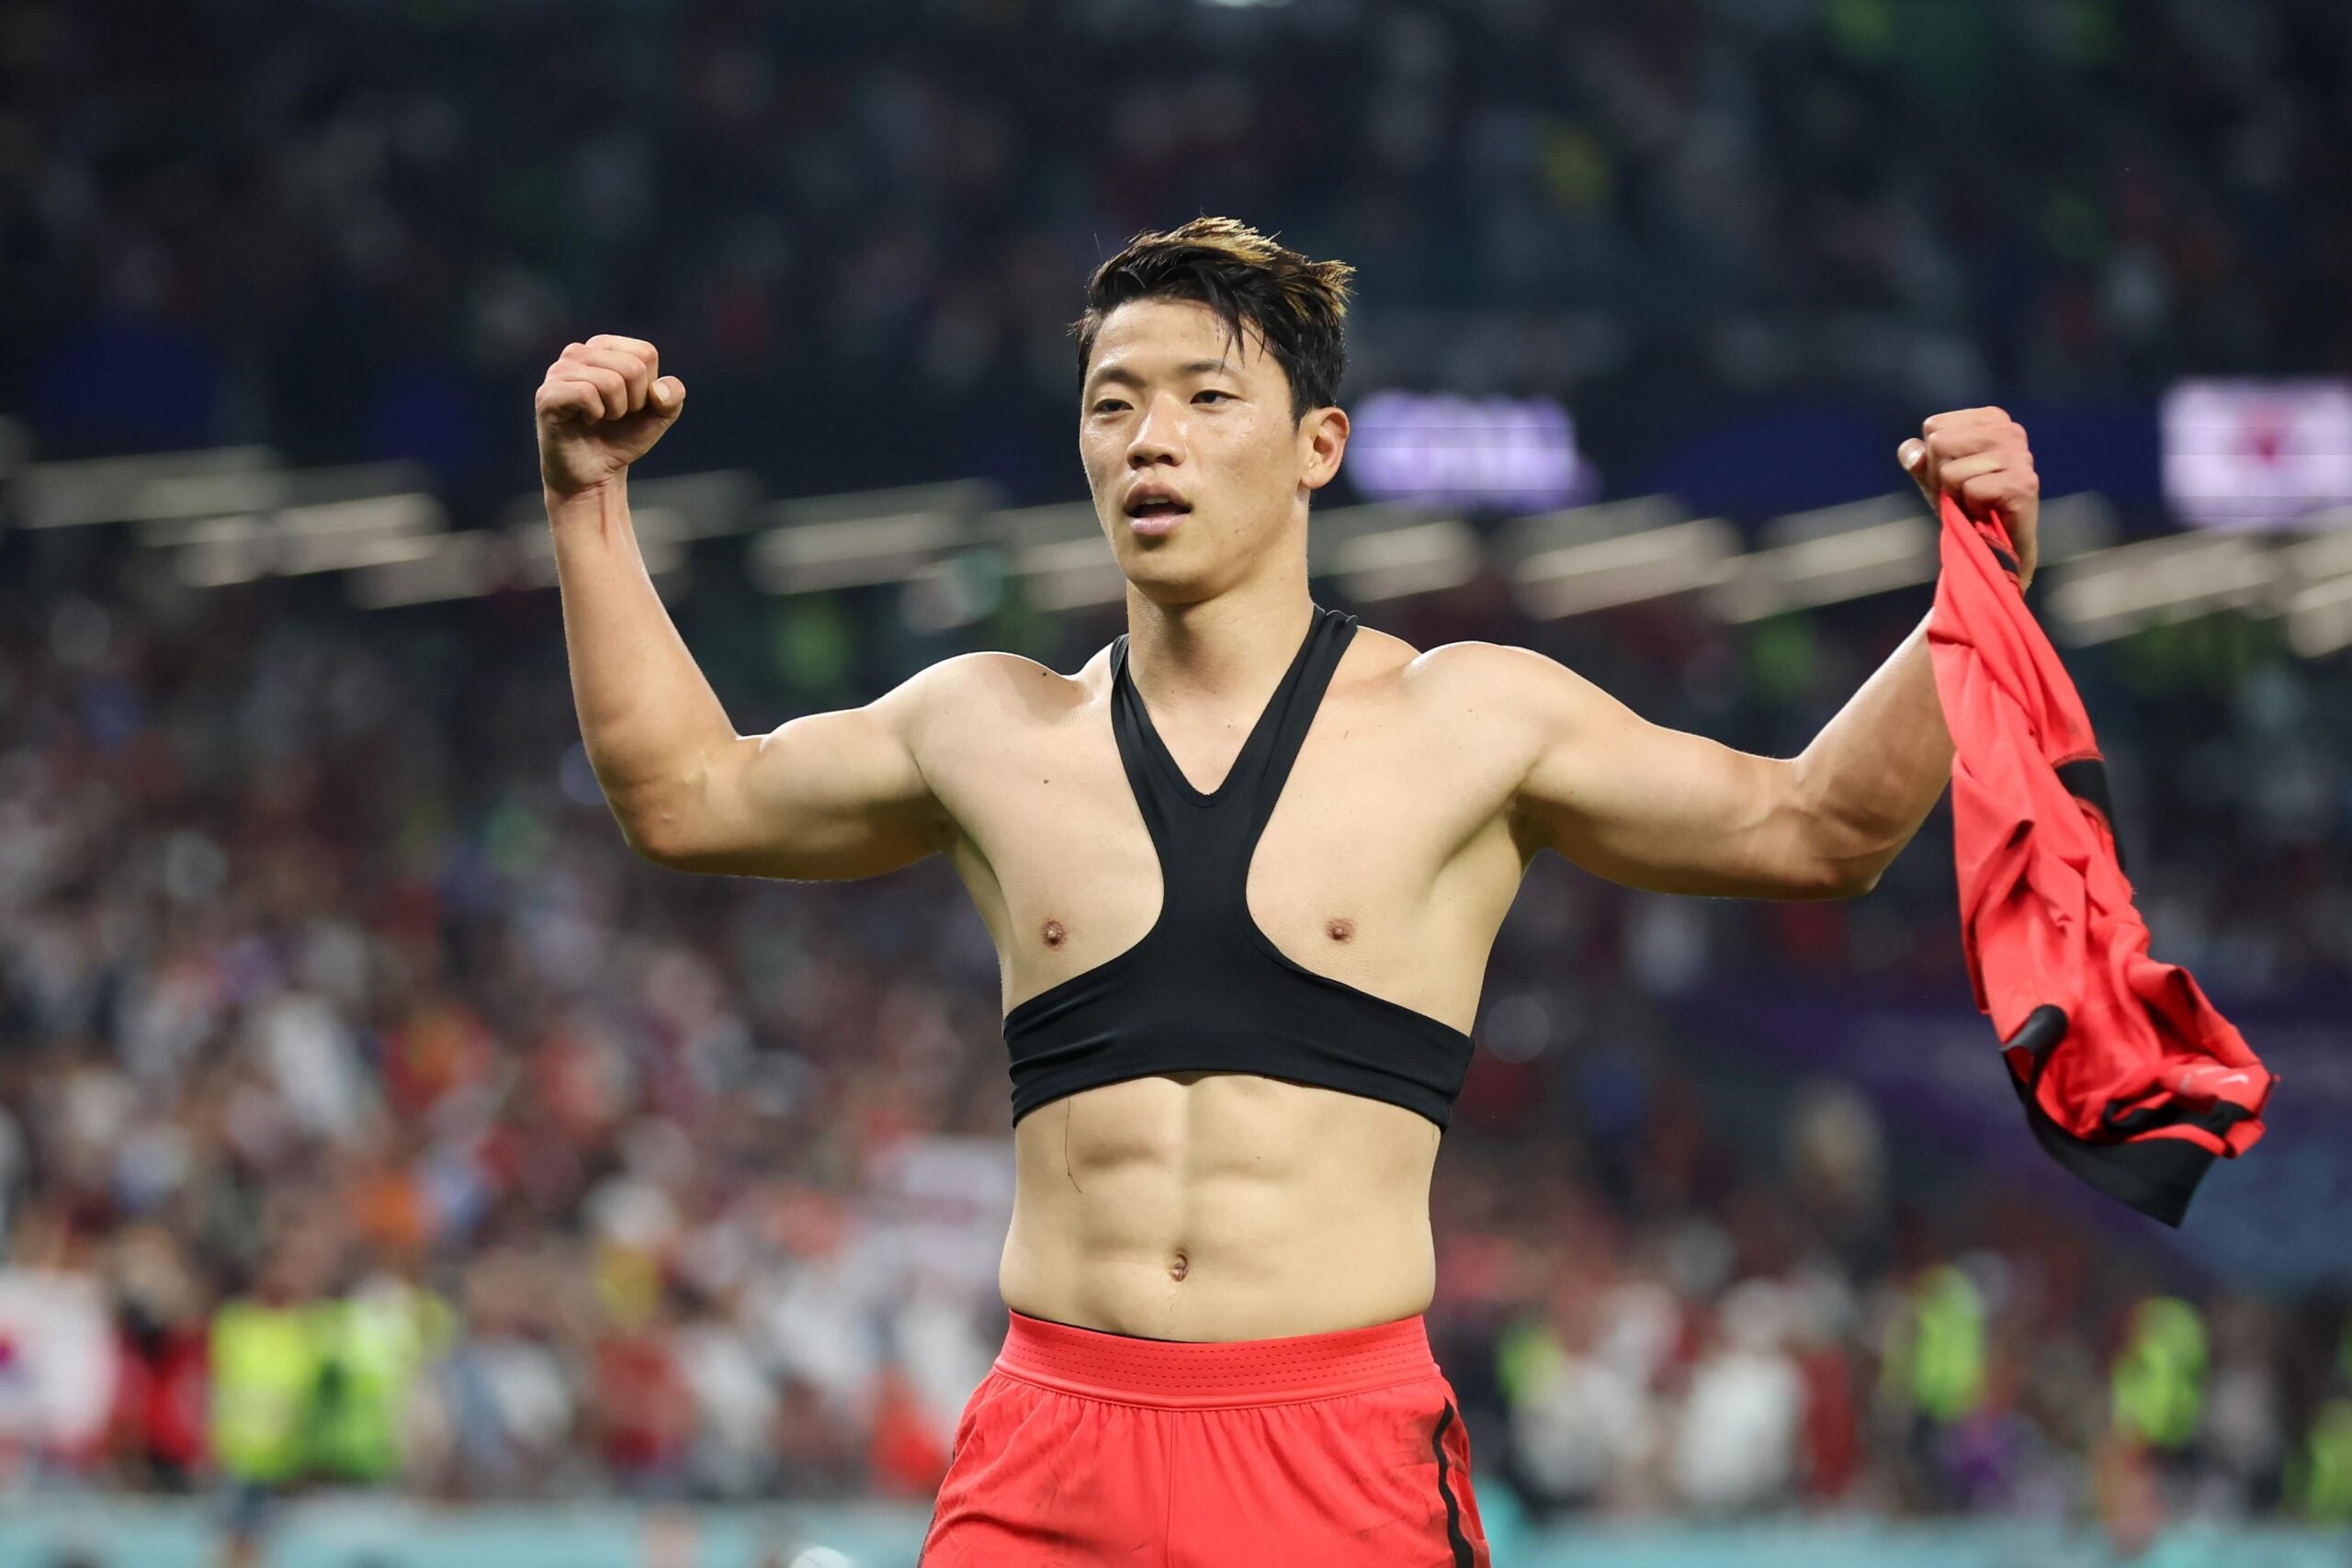 Good Question: Why do soccer players wear what looks like sports bras?